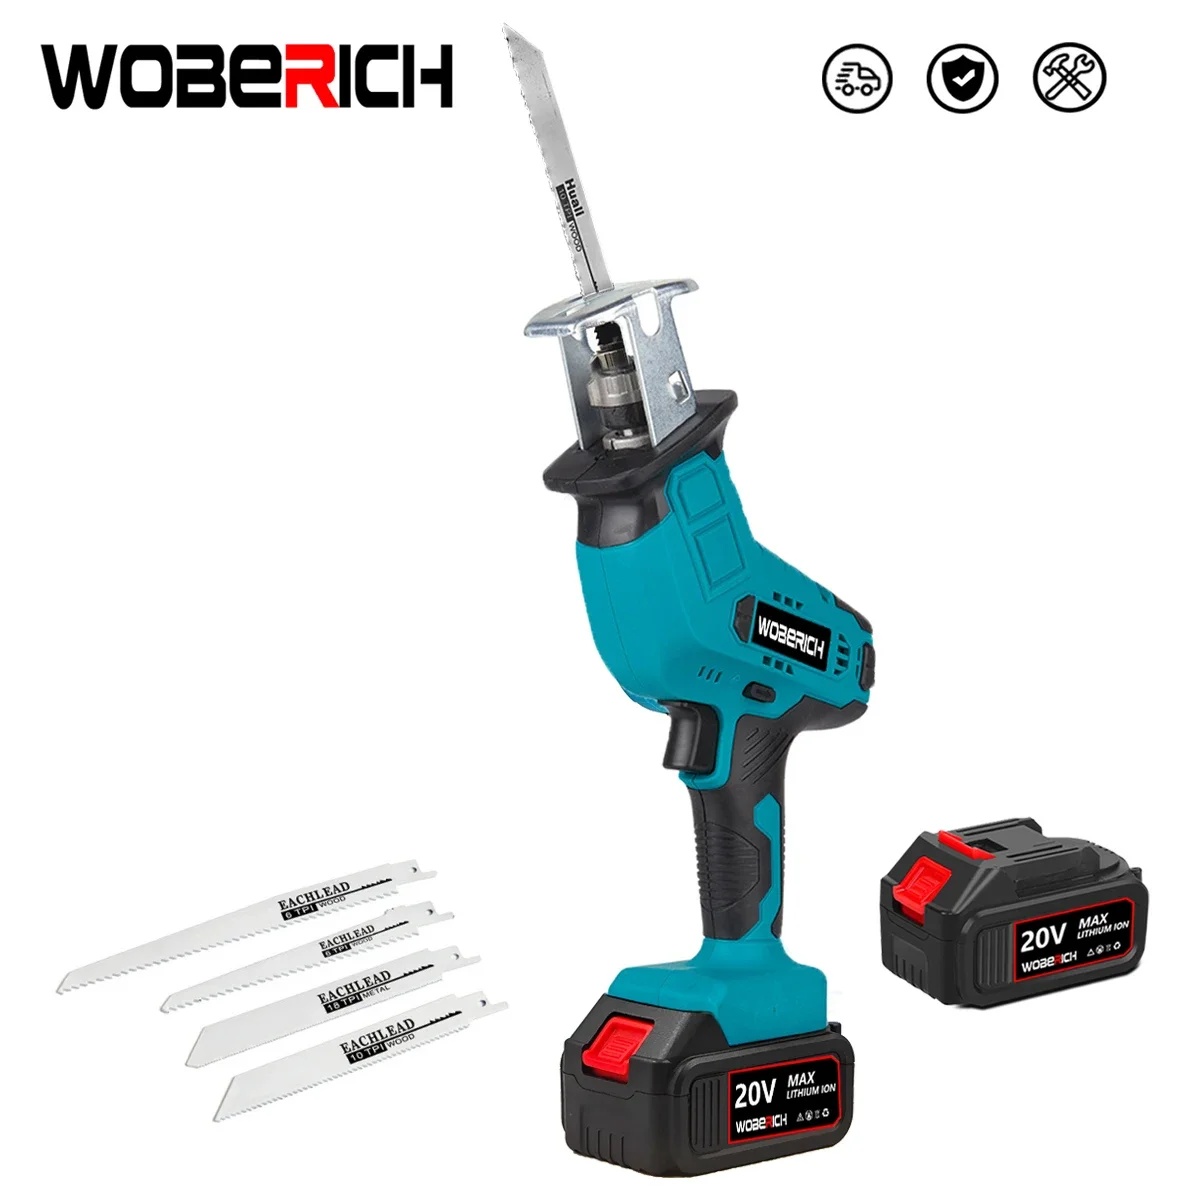 3000w cordless reciprocating saw adjustable speed chainsaw wood metal pipe cutting electric saw tools for makita 18v battery Cordless Reciprocating Saw 18V Adjustable Speed Electric Saw Wood Metal PVC Pipe Cutting fit Makita 18v Battery By WOBERICH